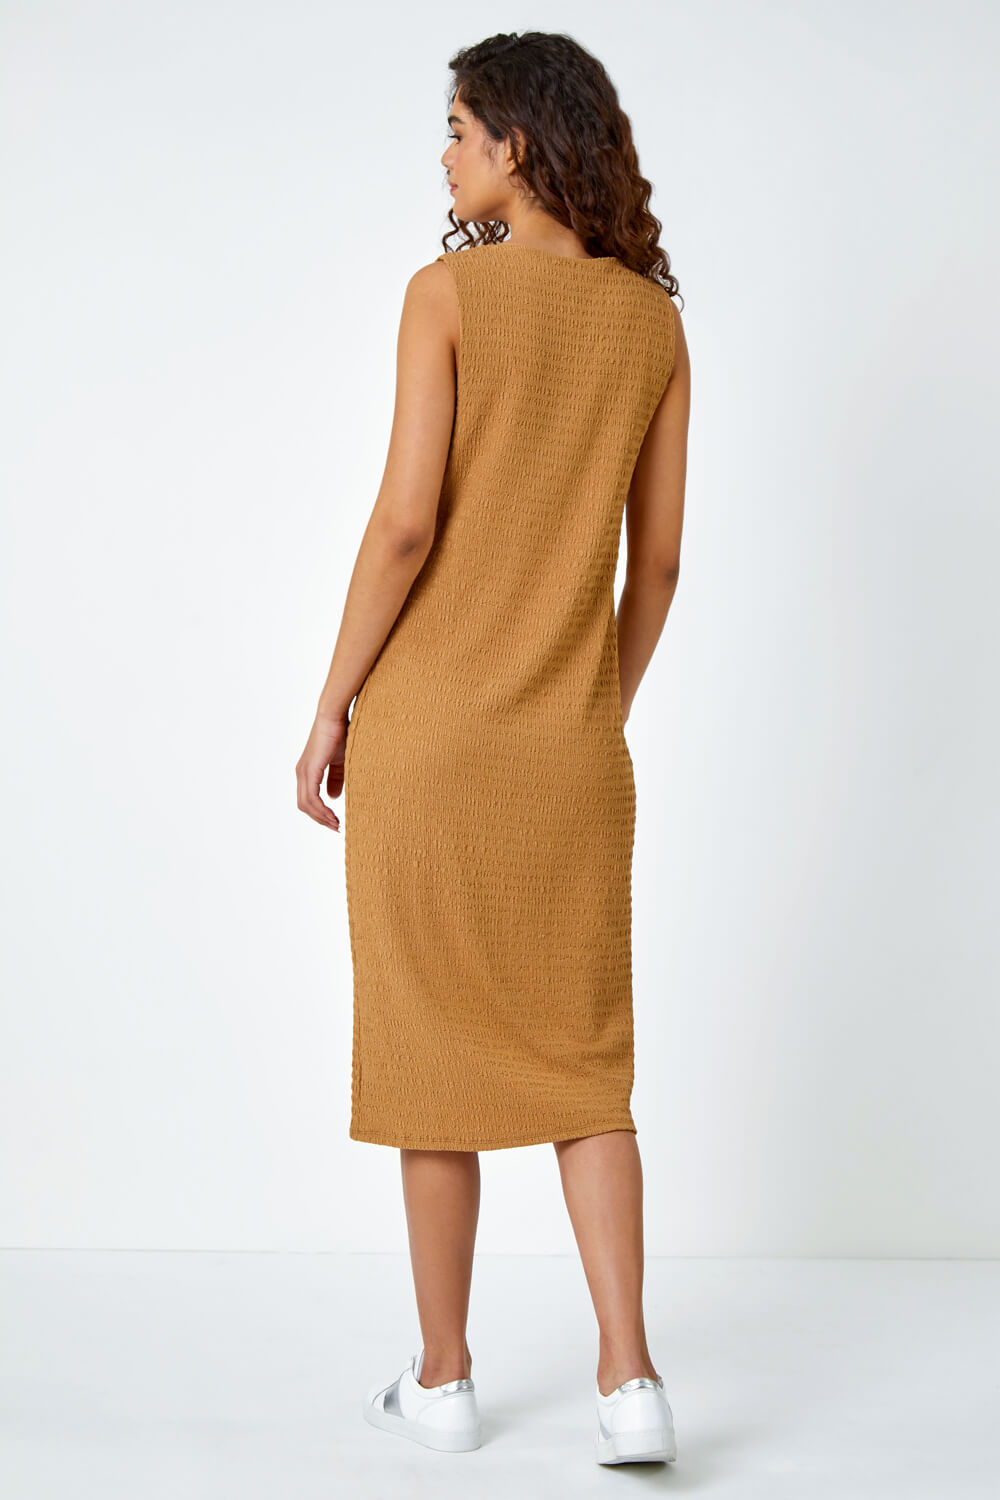 Biscuit Sleeveless Textured Midi Stretch Dress, Image 3 of 5